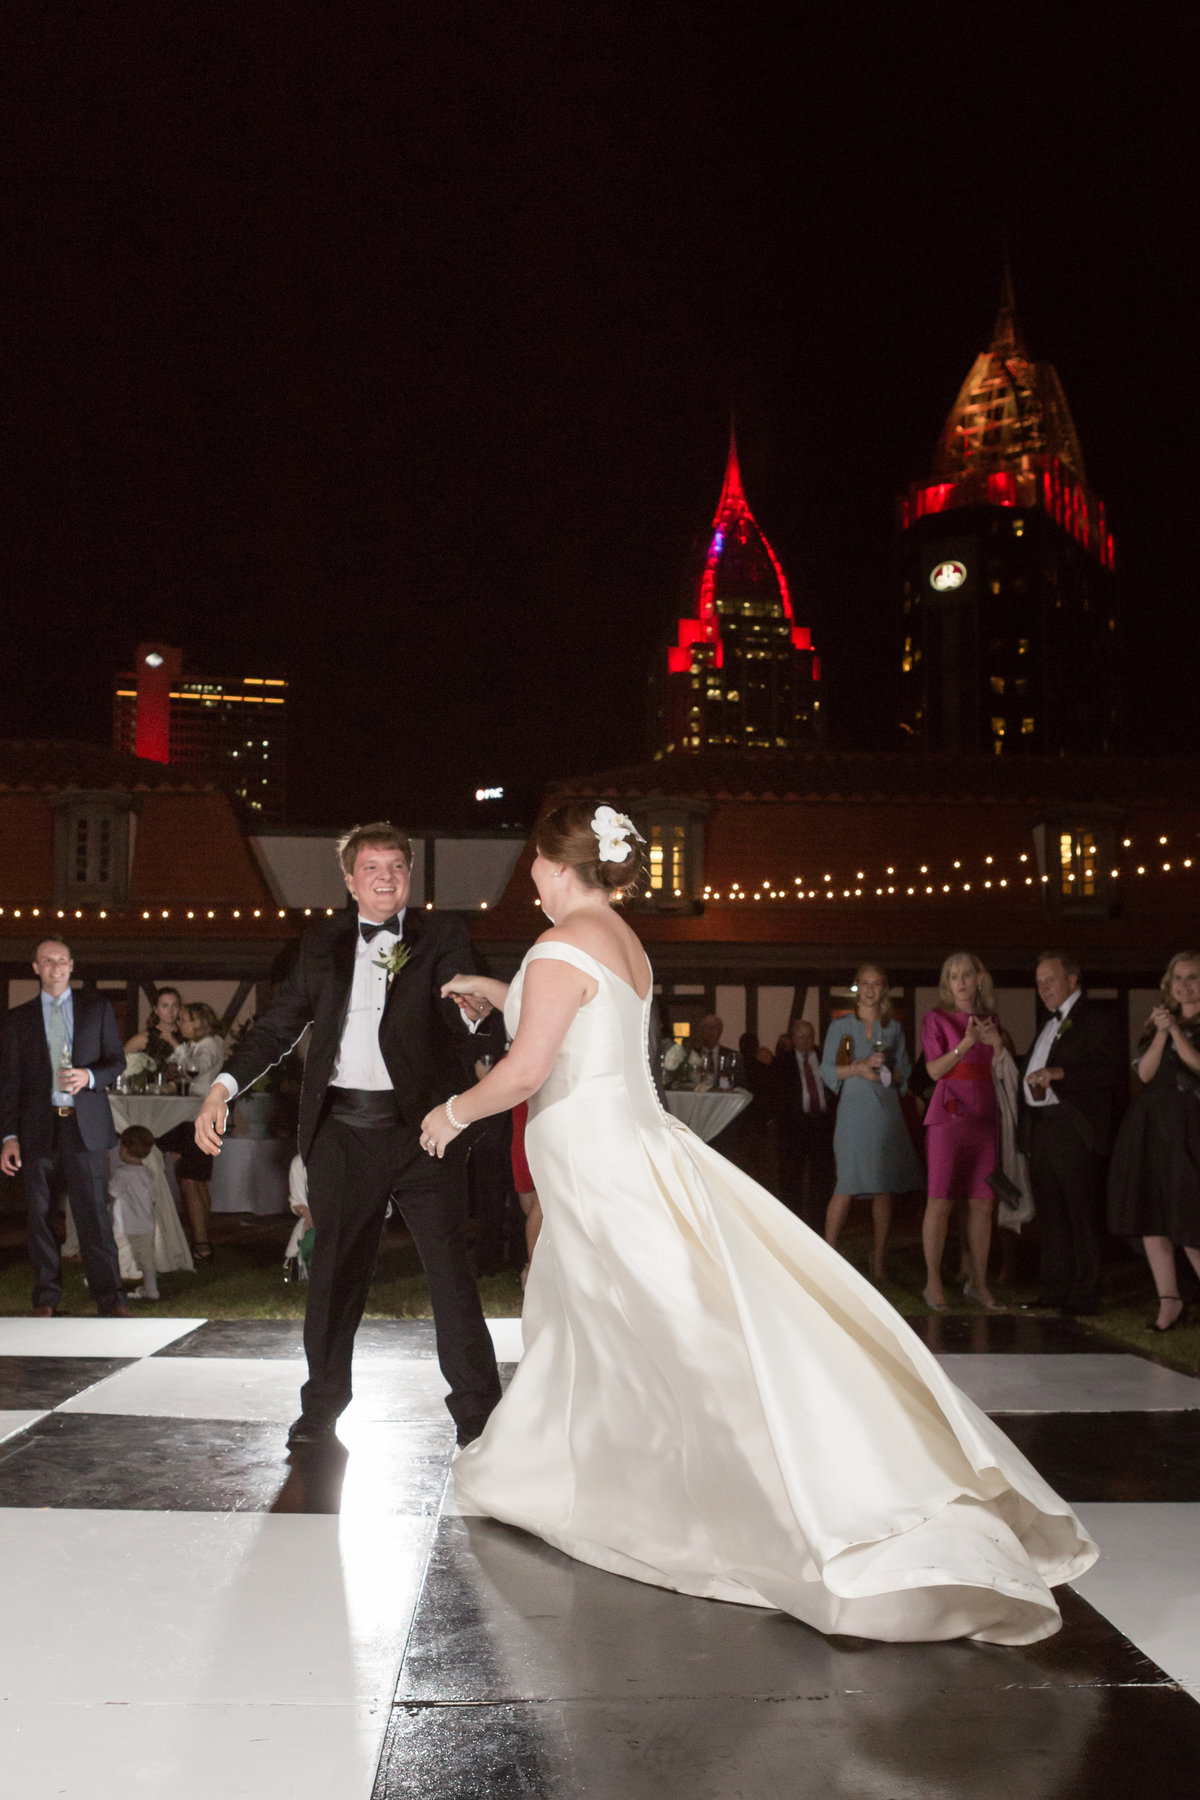 The new couple has their first dance at Ft. Conde in Mobile, Alabama.